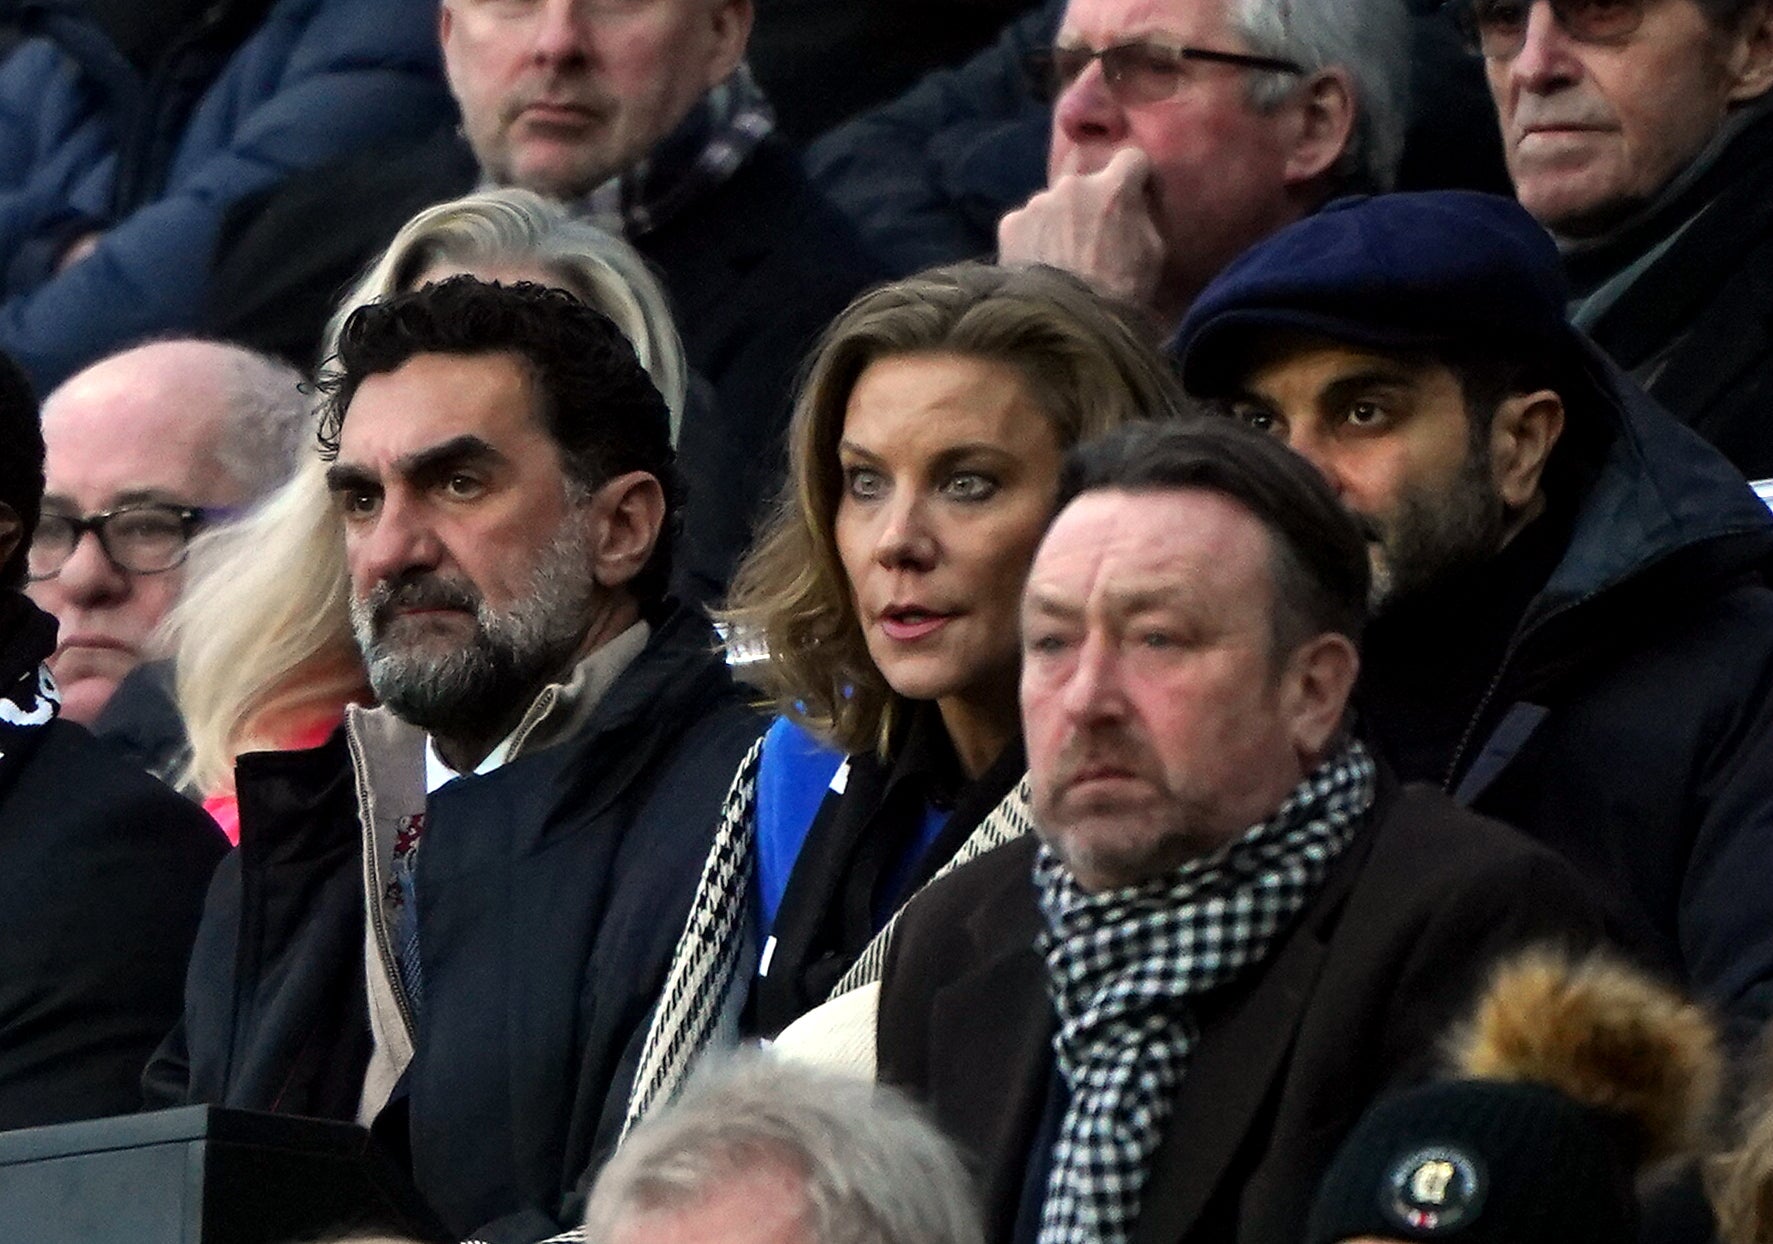 Newcastle’s new owners have encountered problems in their first window since the takeover